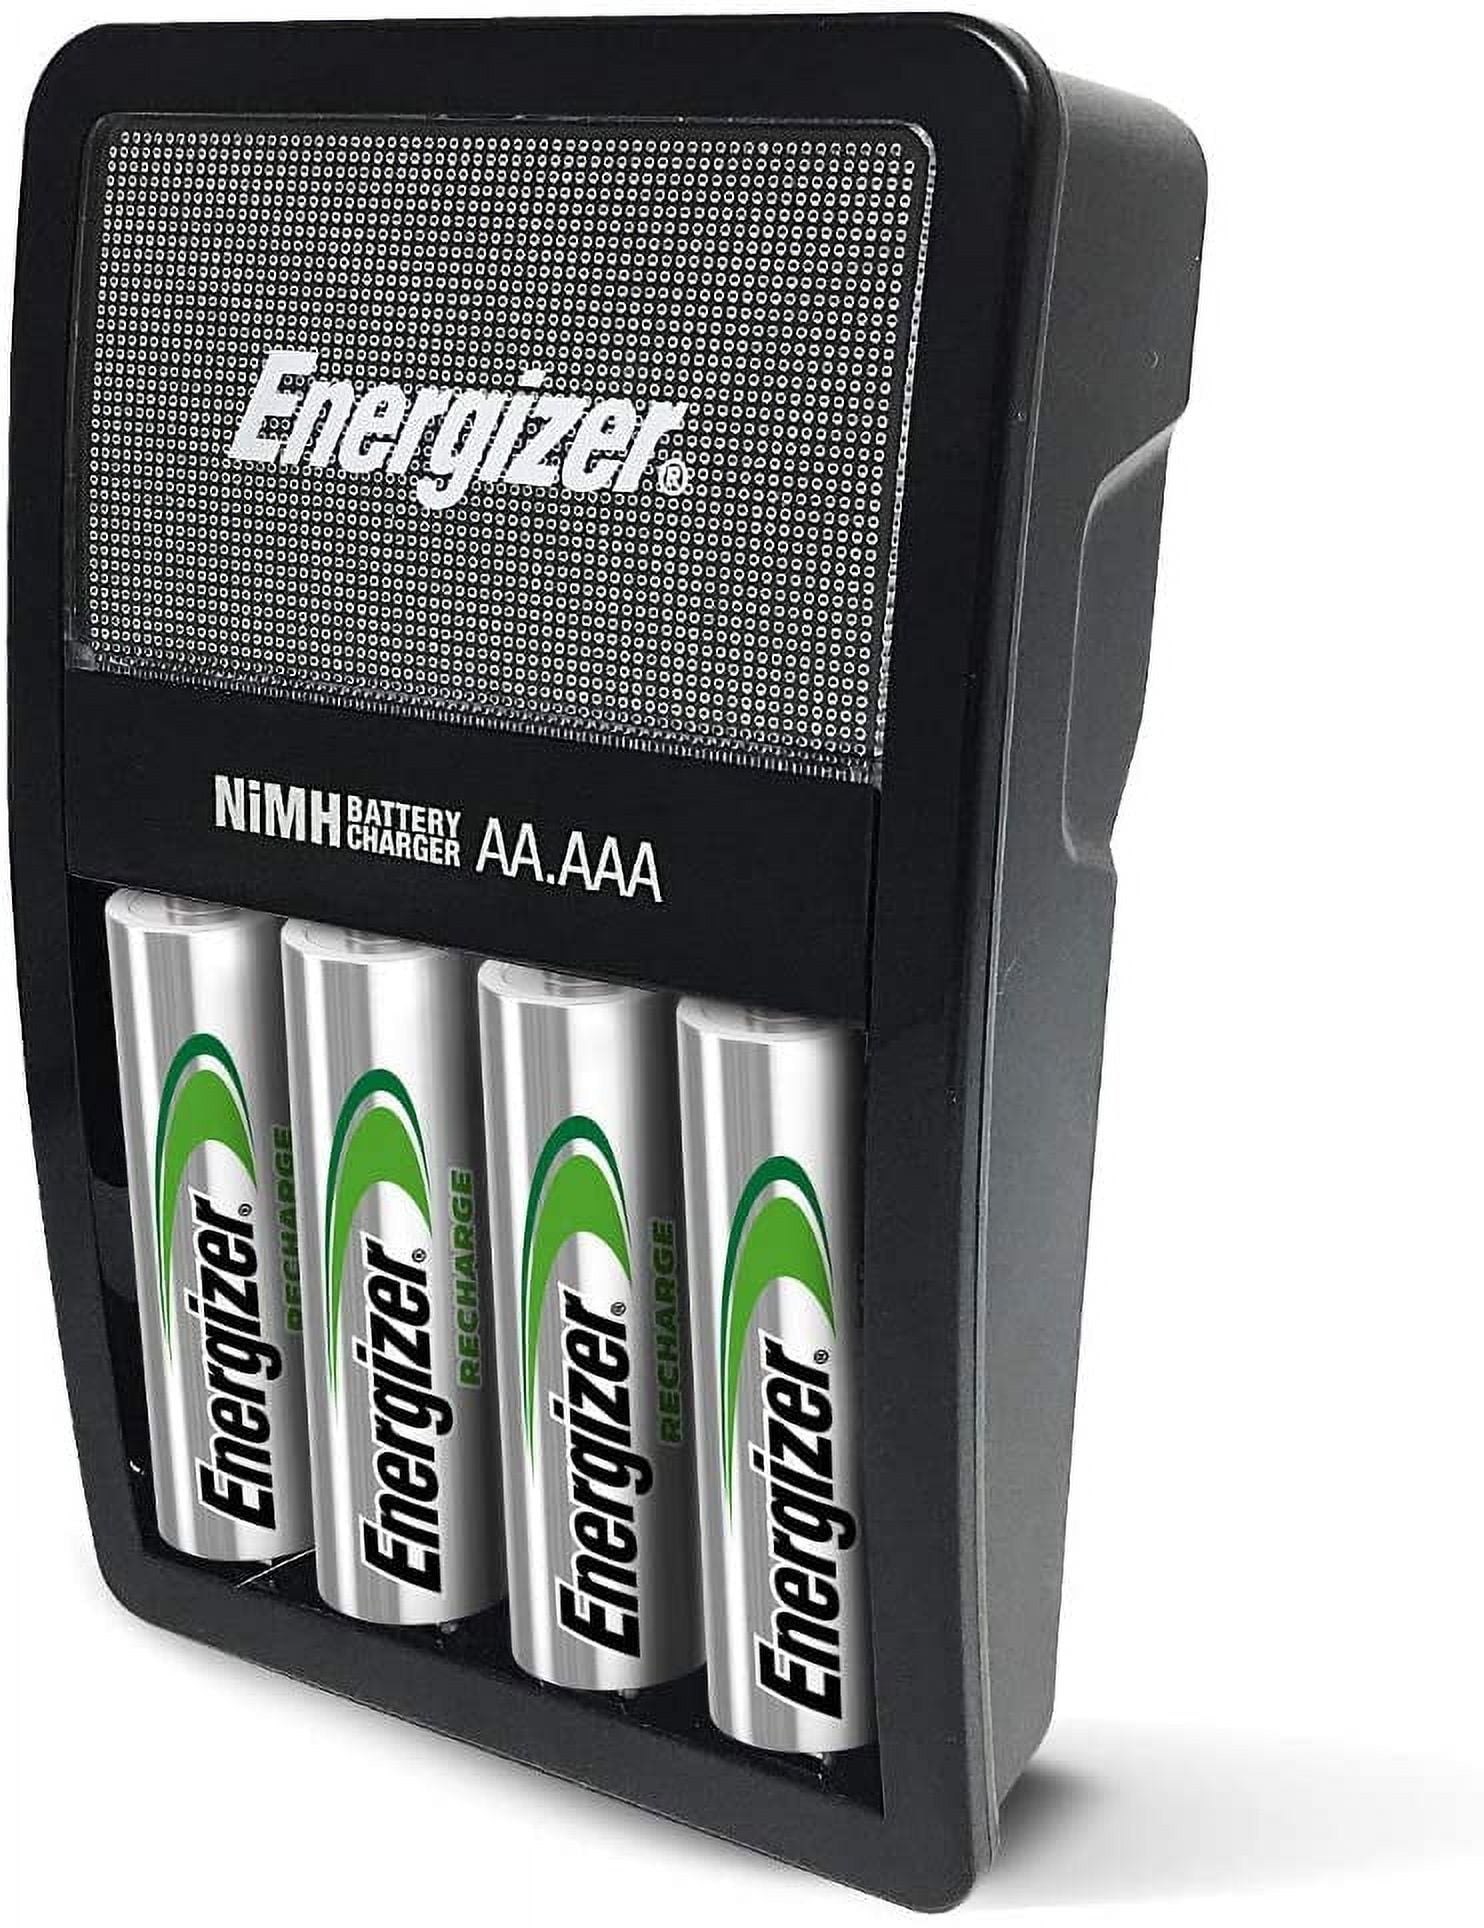 Energizer Recharge Value Charger for NiMH Rechargeable AA and AAA Batteries